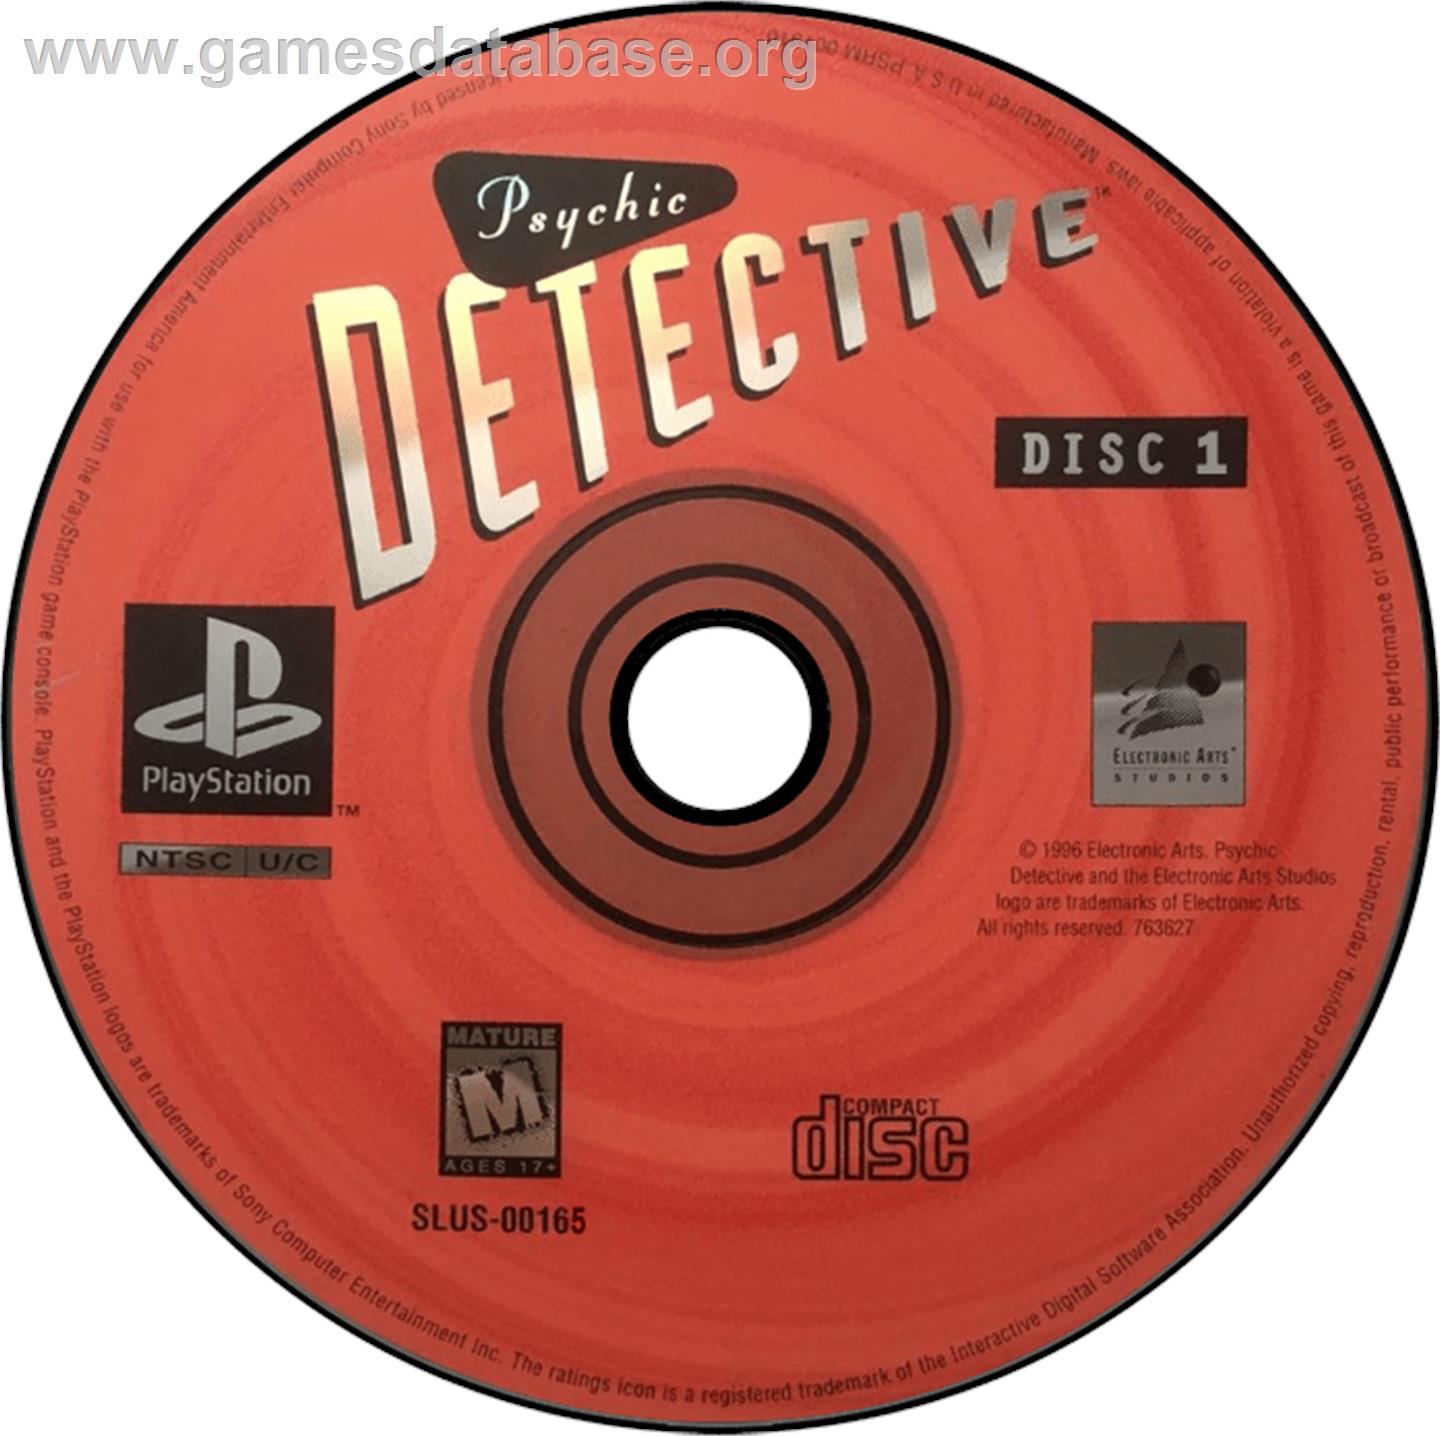 Psychic Detective - Sony Playstation - Artwork - Disc